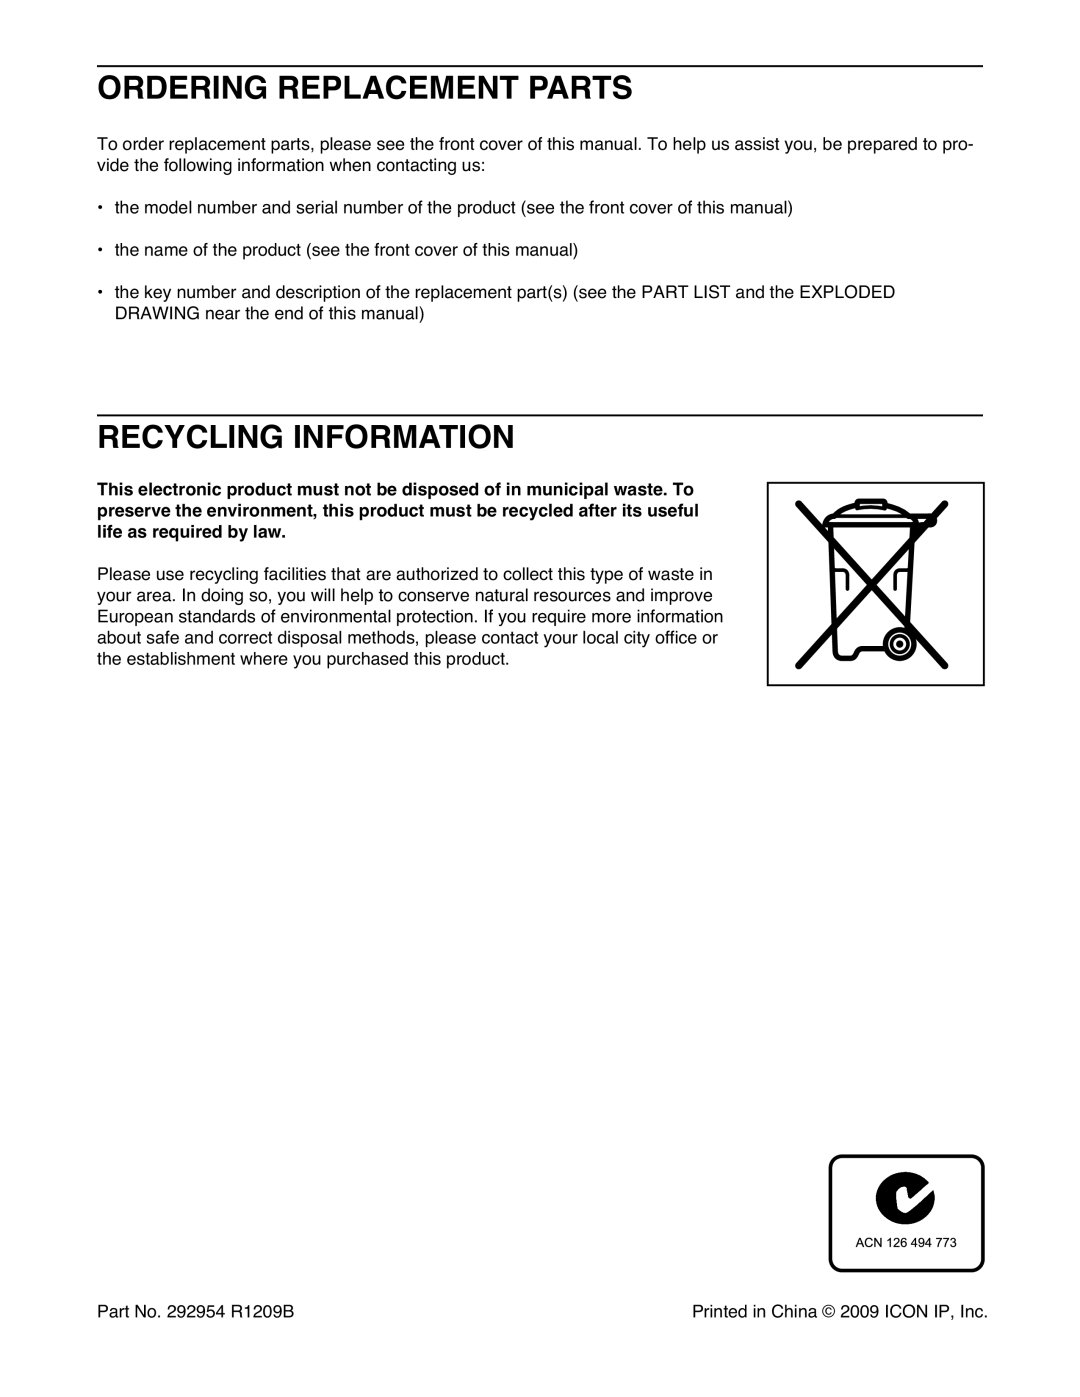 Weslo WETL34709.0 user manual Ordering Replacement Parts, Recycling Information 